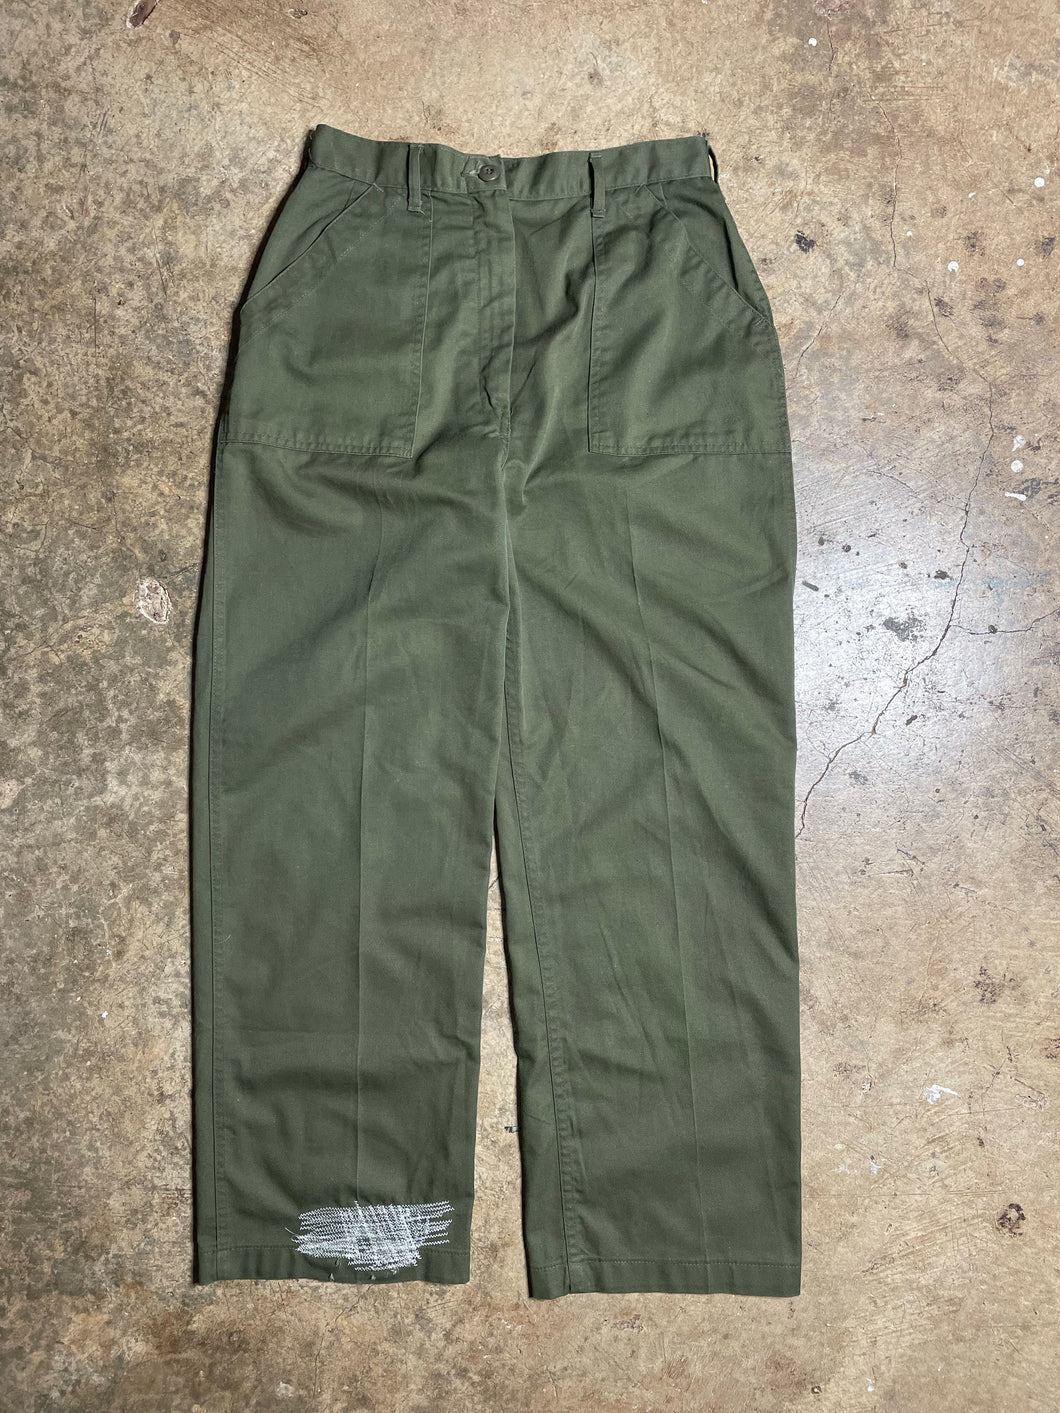 Vintage Military Pant OG507 Repaired - 28 x 29